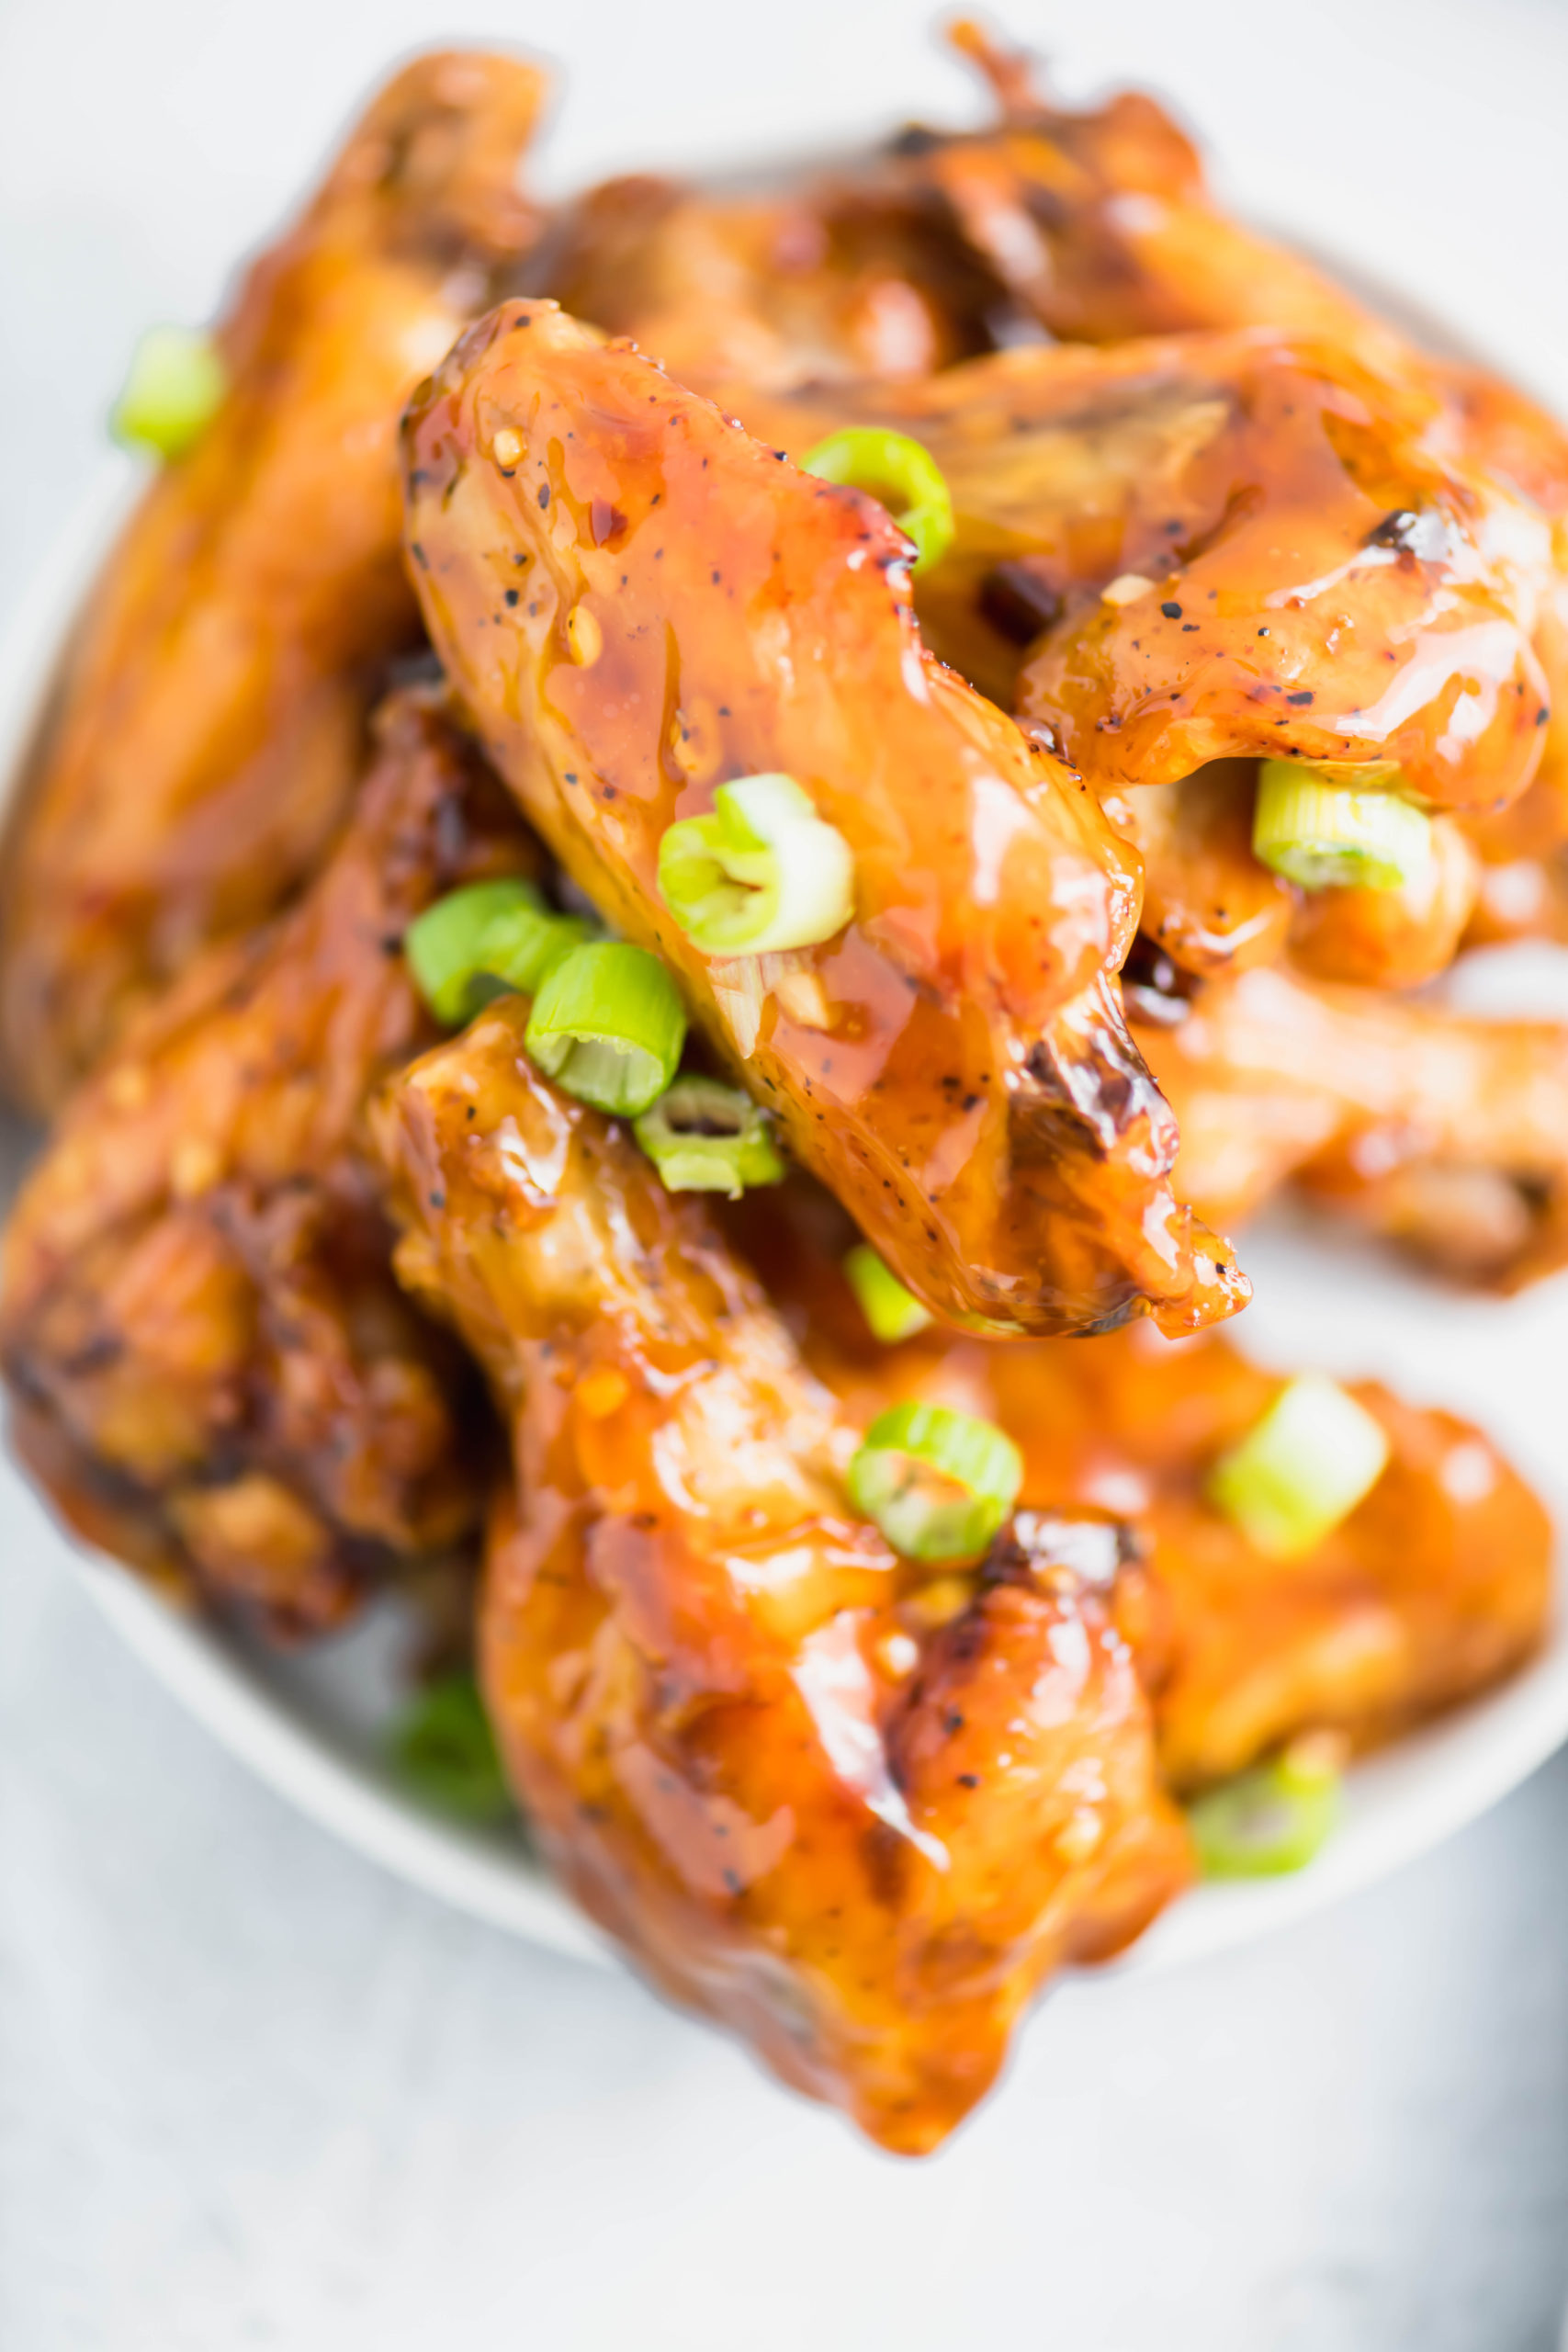 Need a fun and flavorful chicken wing recipe for the Super Bowl? These Orange Chicken Wings are packed with bright, spicy flavor.